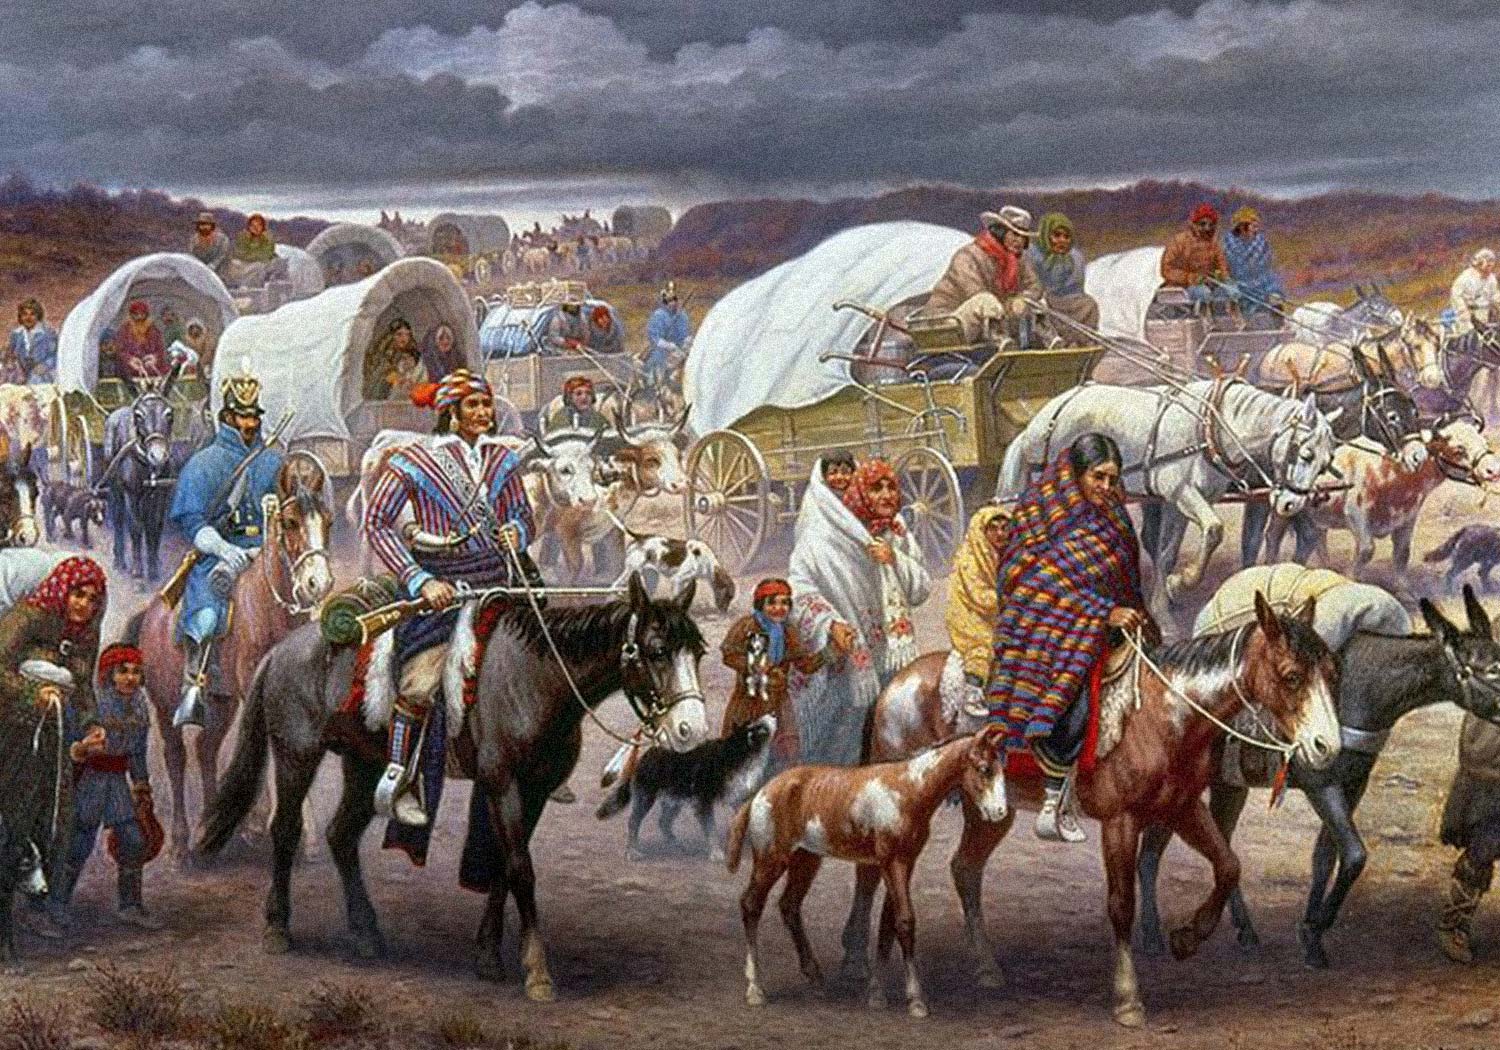 A painting illustrates the Trail of Tears, showing Indigenous people in wagons, on horseback, and on foot, forced to leave their homeland by armed soldiers.